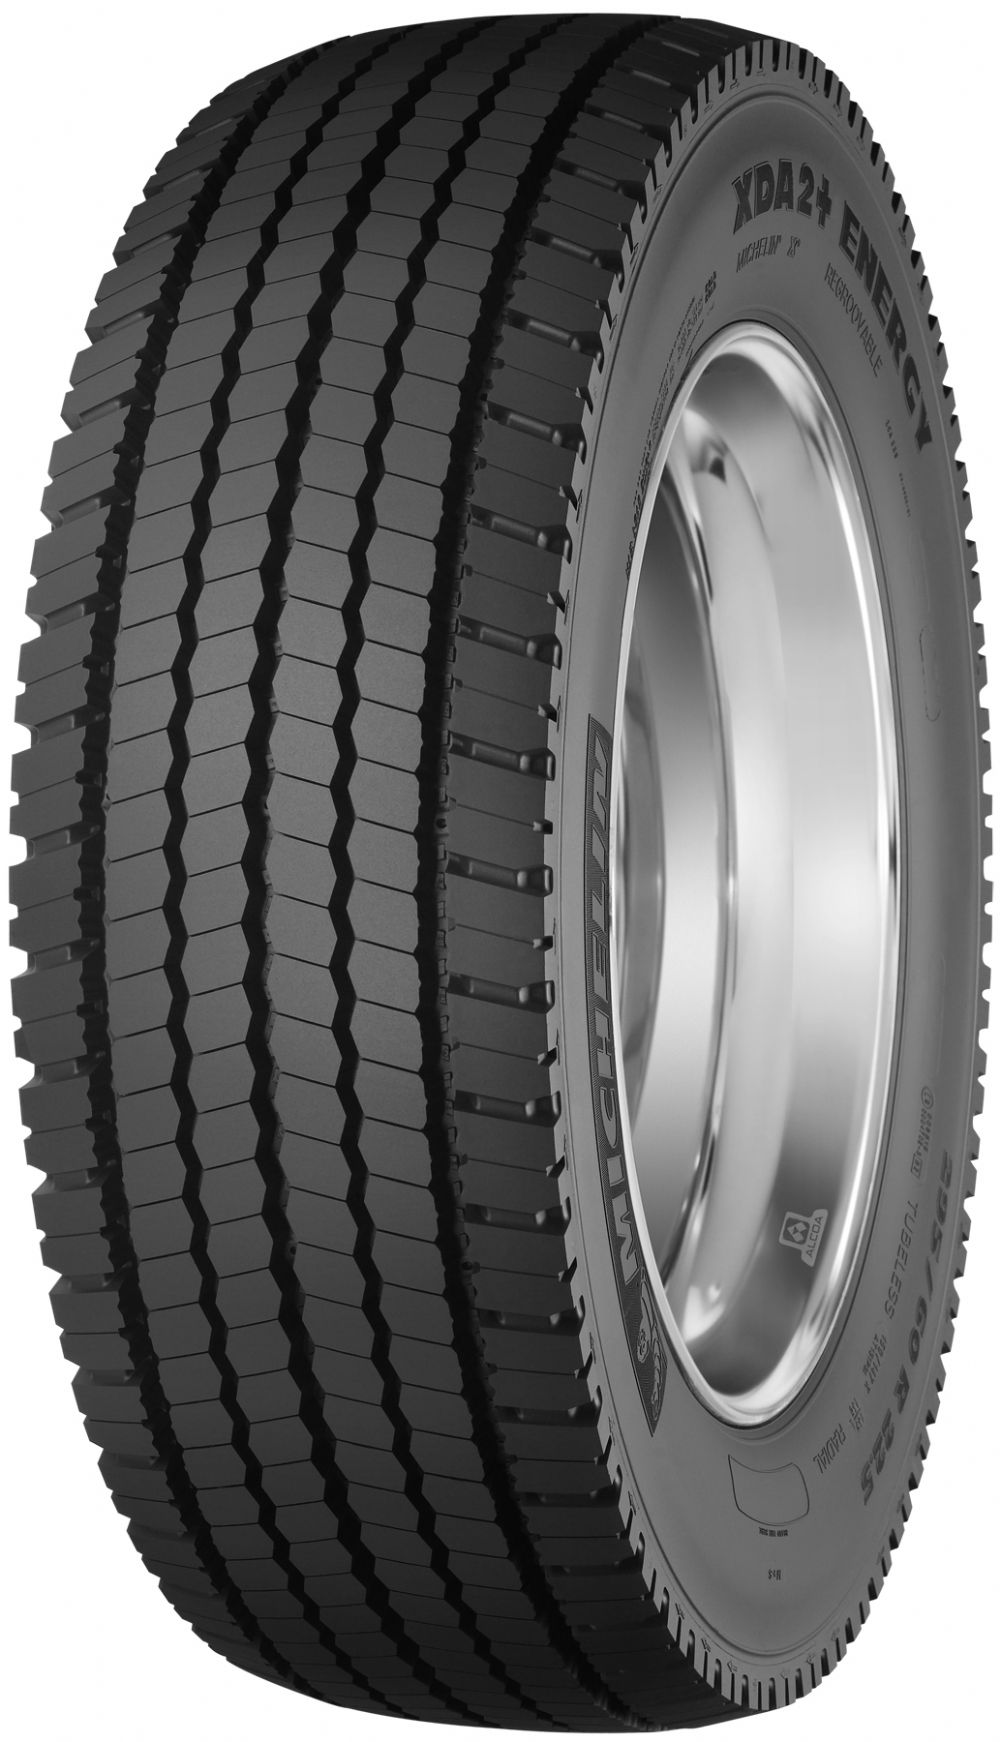 product_type-heavy_tires MICHELIN XDA2+ ENERGY 315/70 R22.5 156L